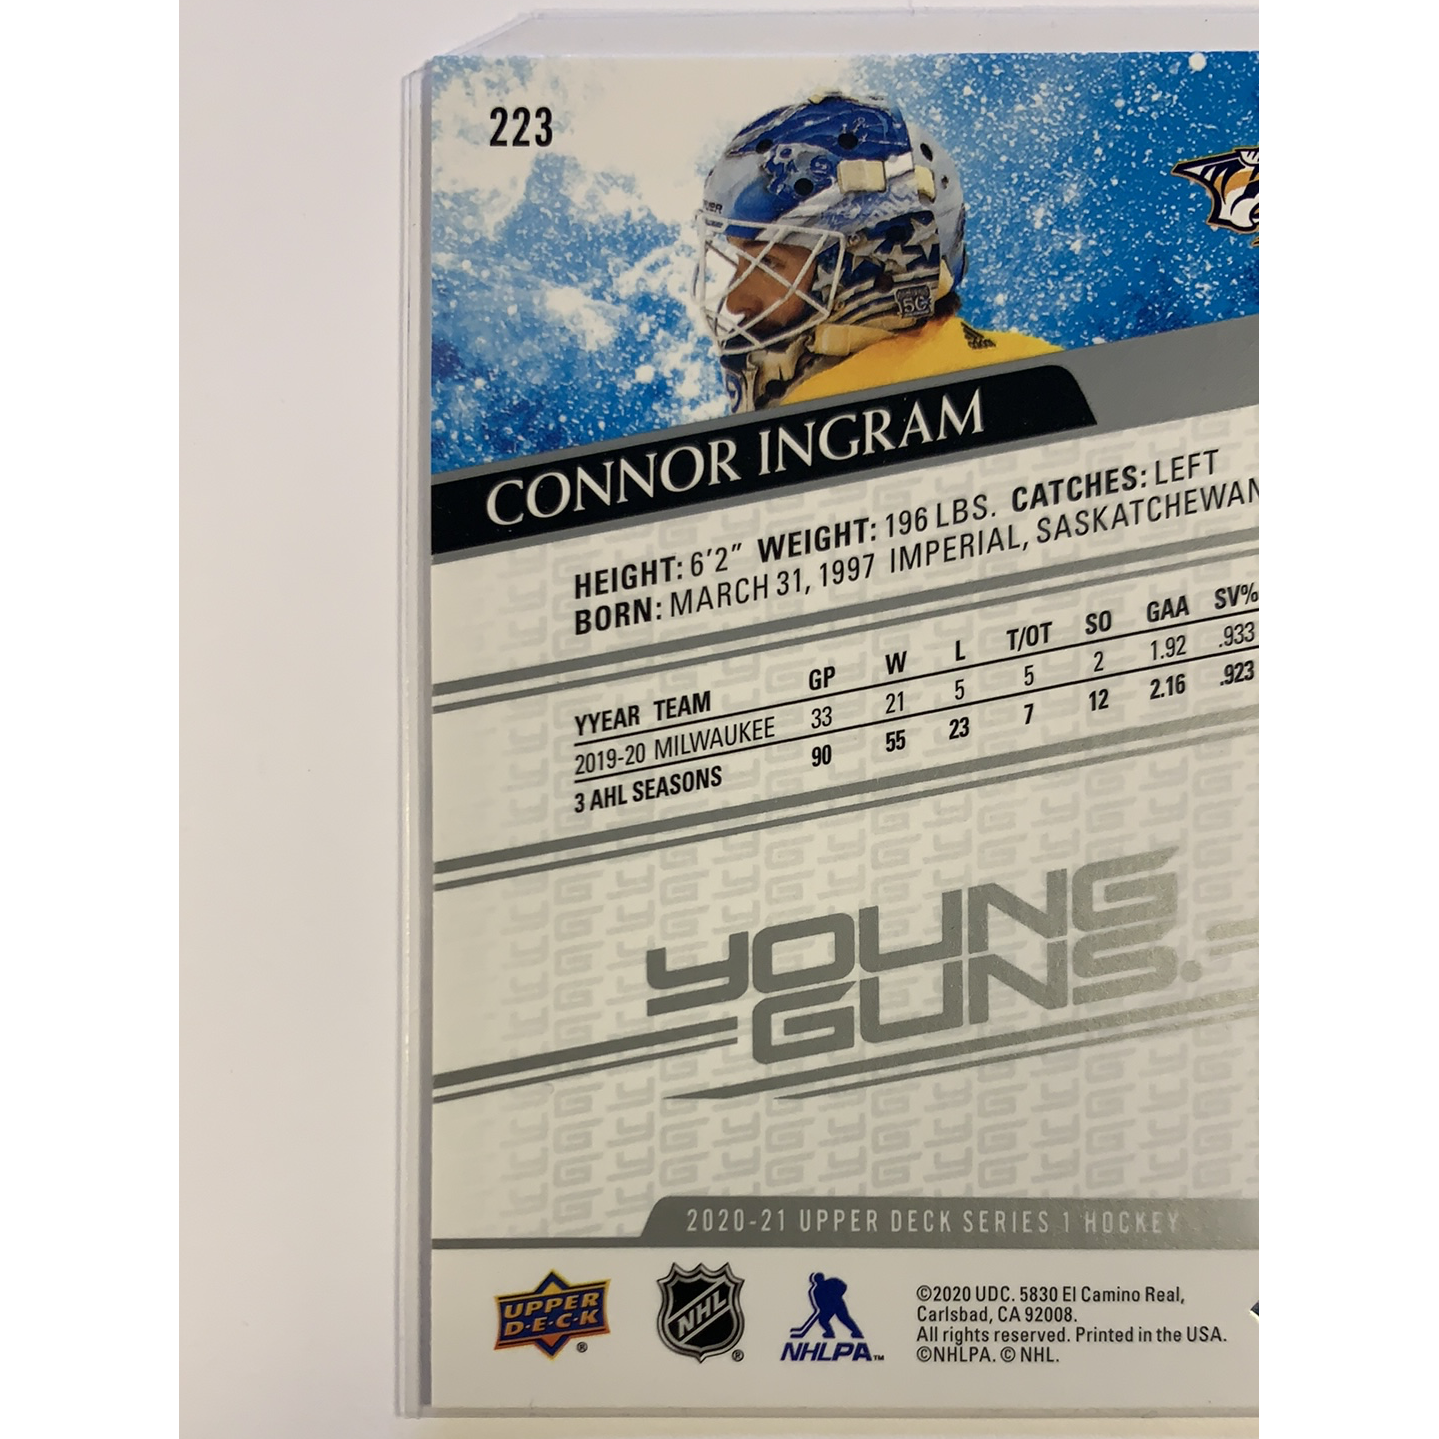  2020-21 Upper Deck Series 1 Connor Ingram Young Guns  Local Legends Cards & Collectibles